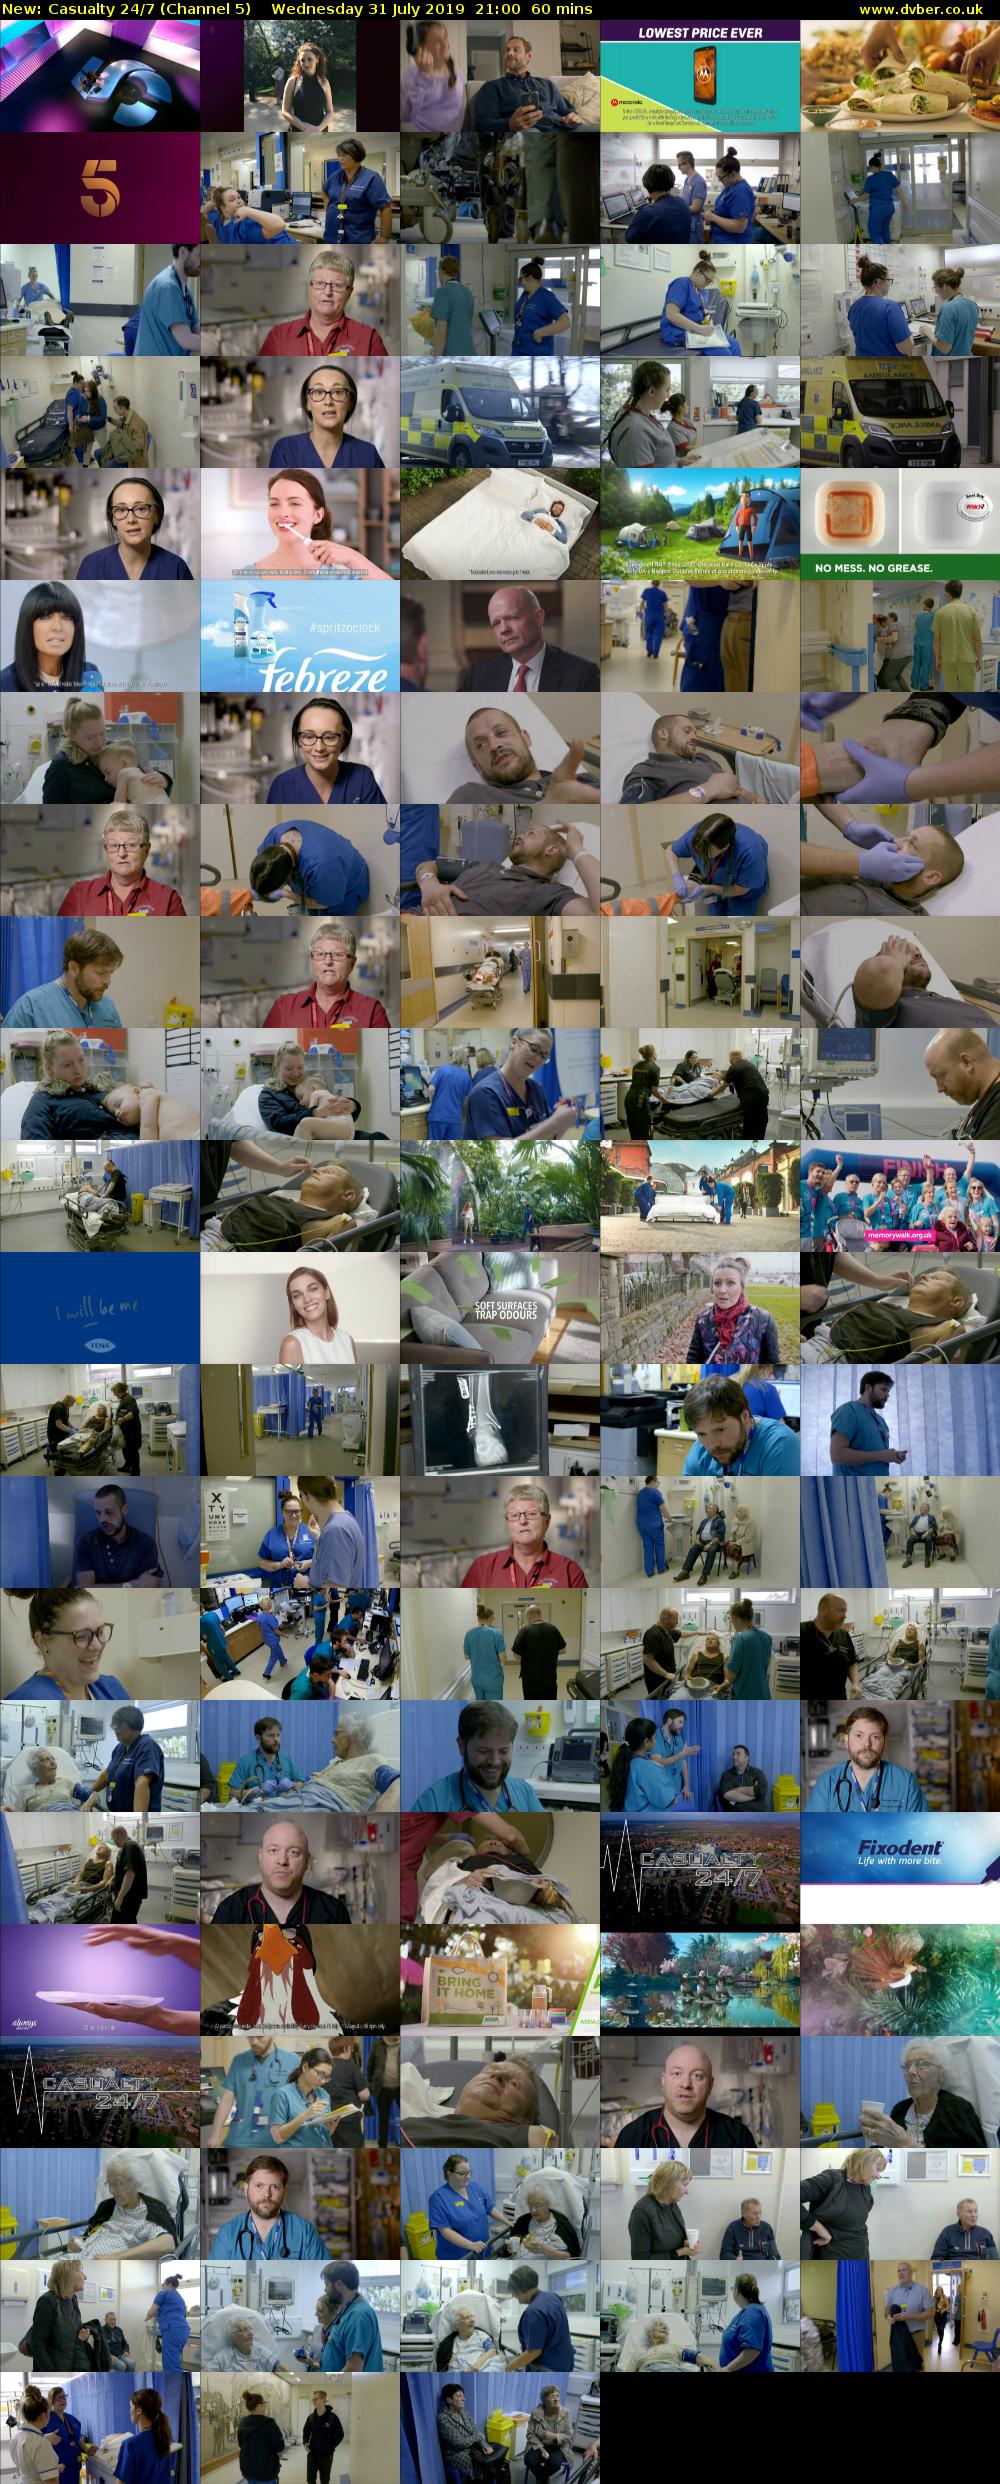 Casualty 24/7 (Channel 5) Wednesday 31 July 2019 21:00 - 22:00